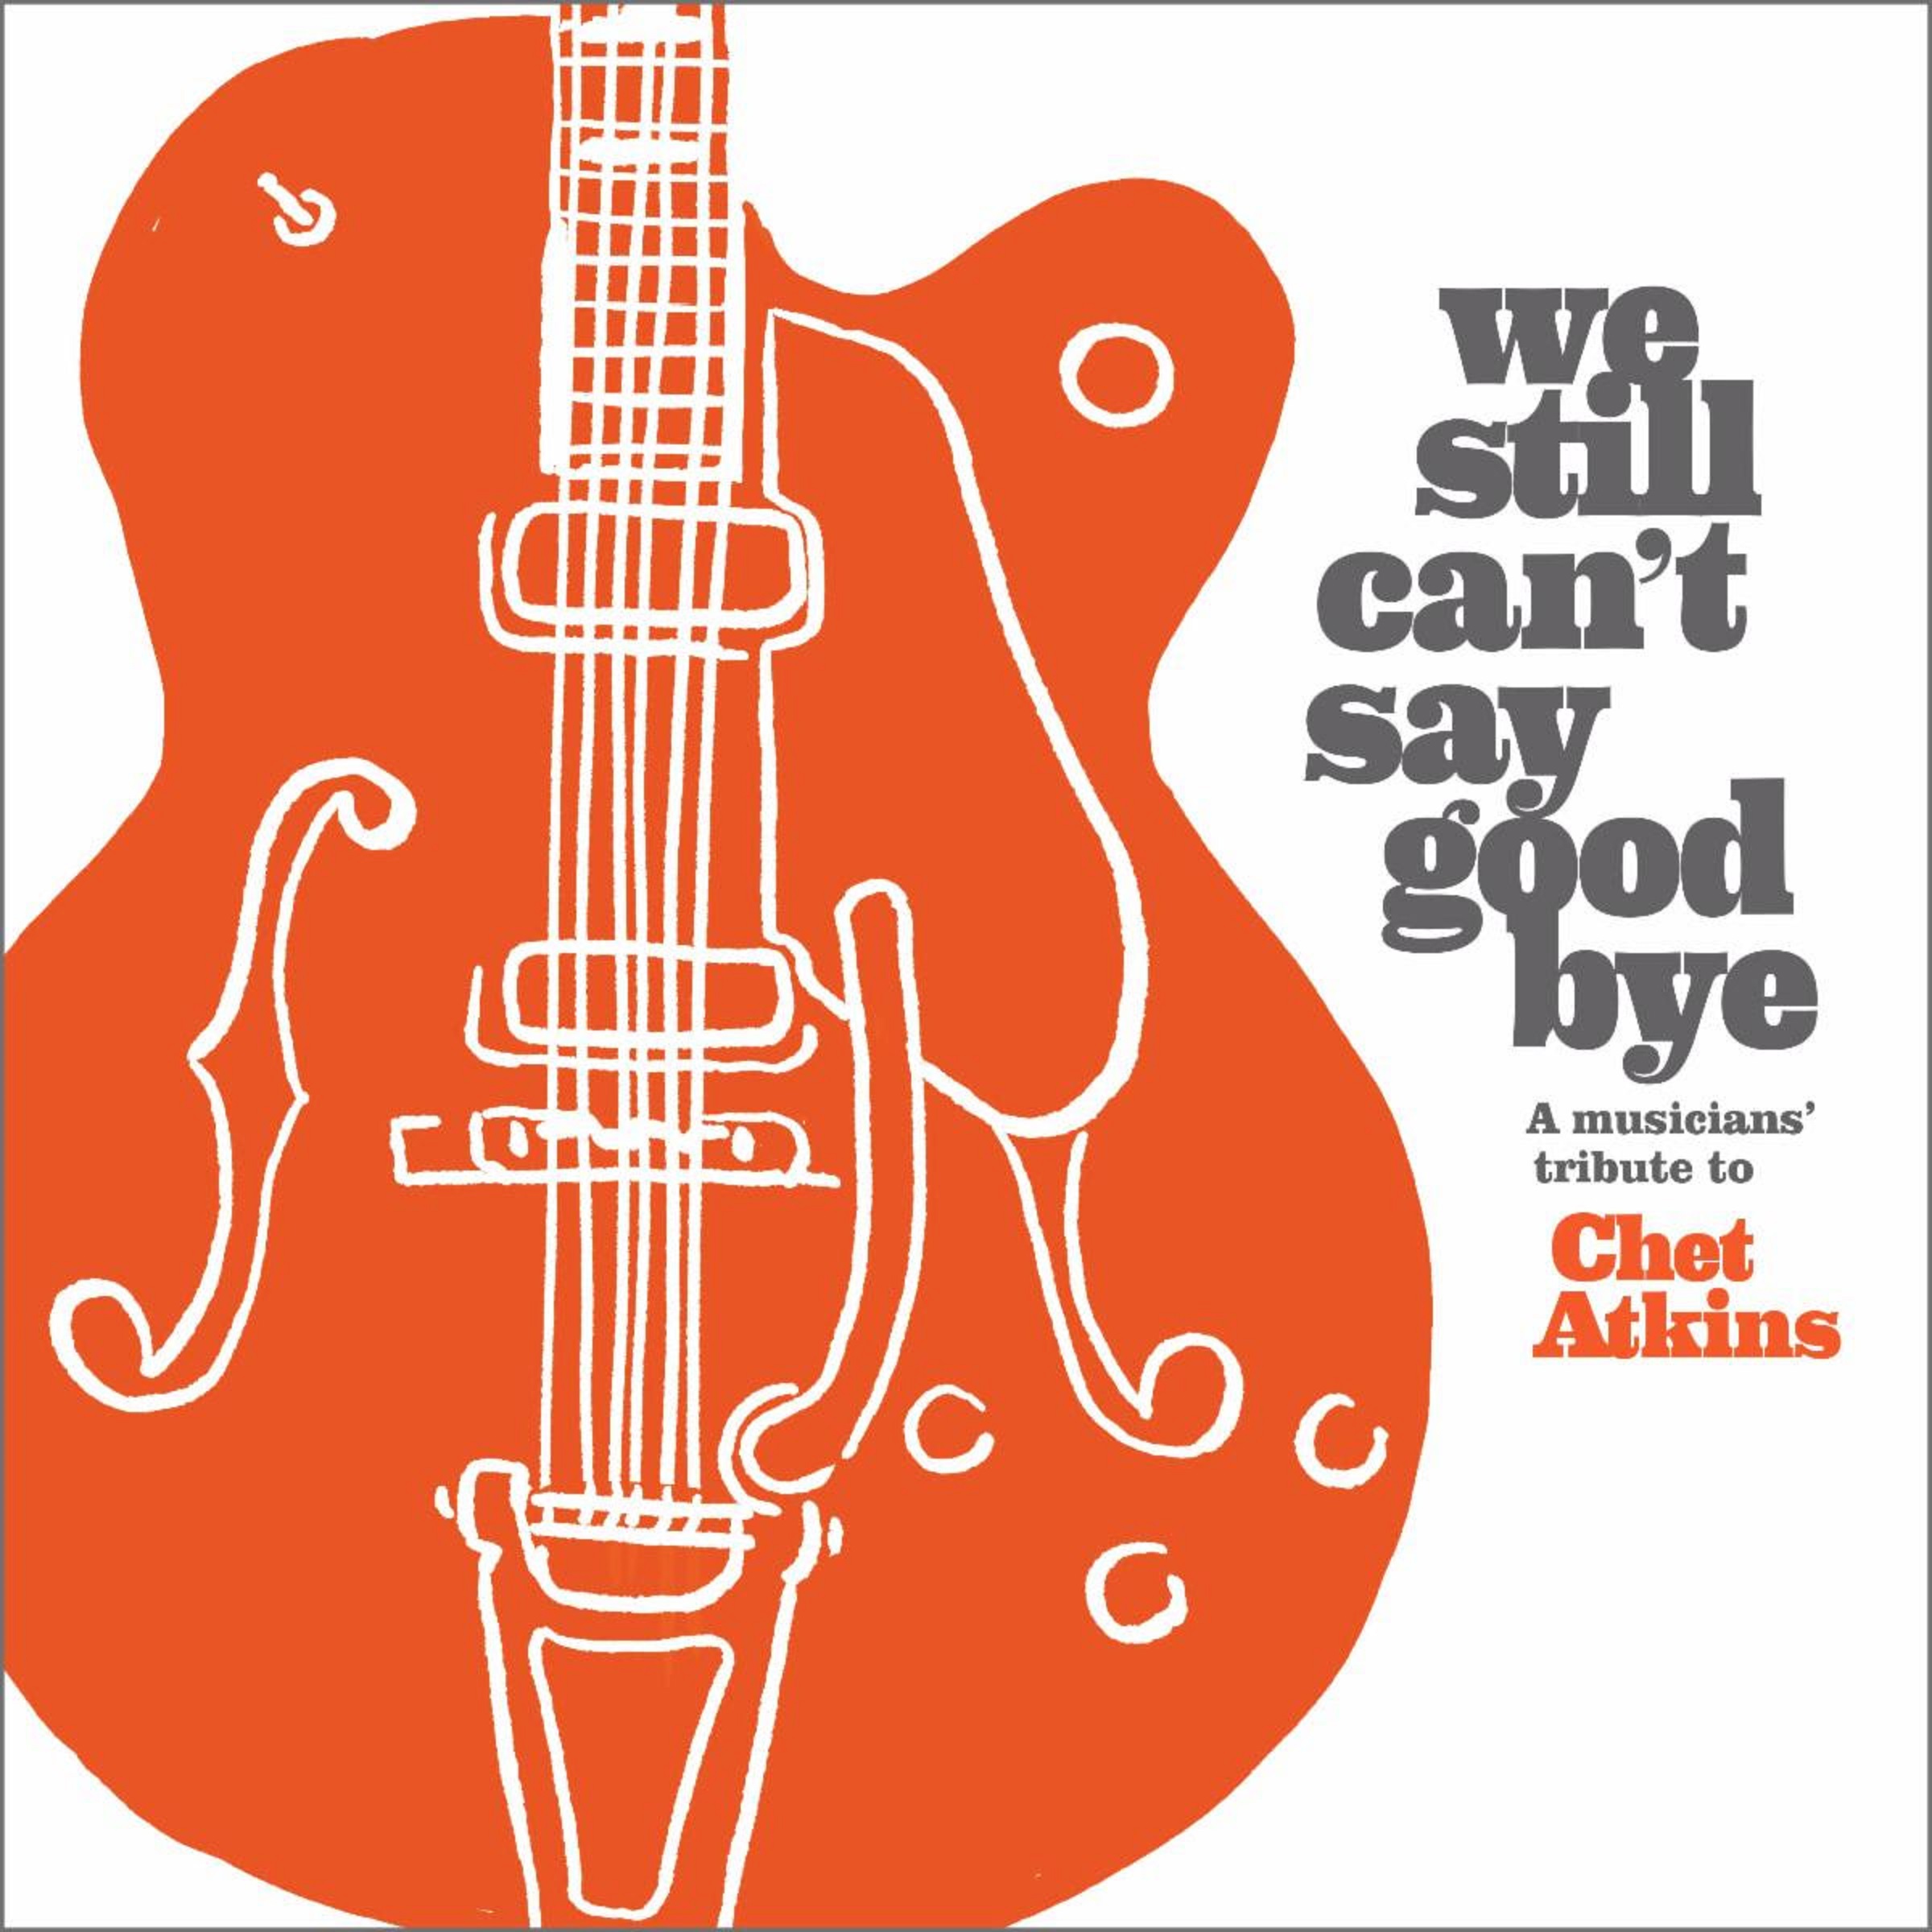 “MR. GUITAR”—The First Single Performed By Tommy Emmanuel C.P.G. and Michael Cleveland From ‘WE STILL CAN'T SAY GOOD BYE’ A Musicians' Tribute To Chet Atkins Out Today